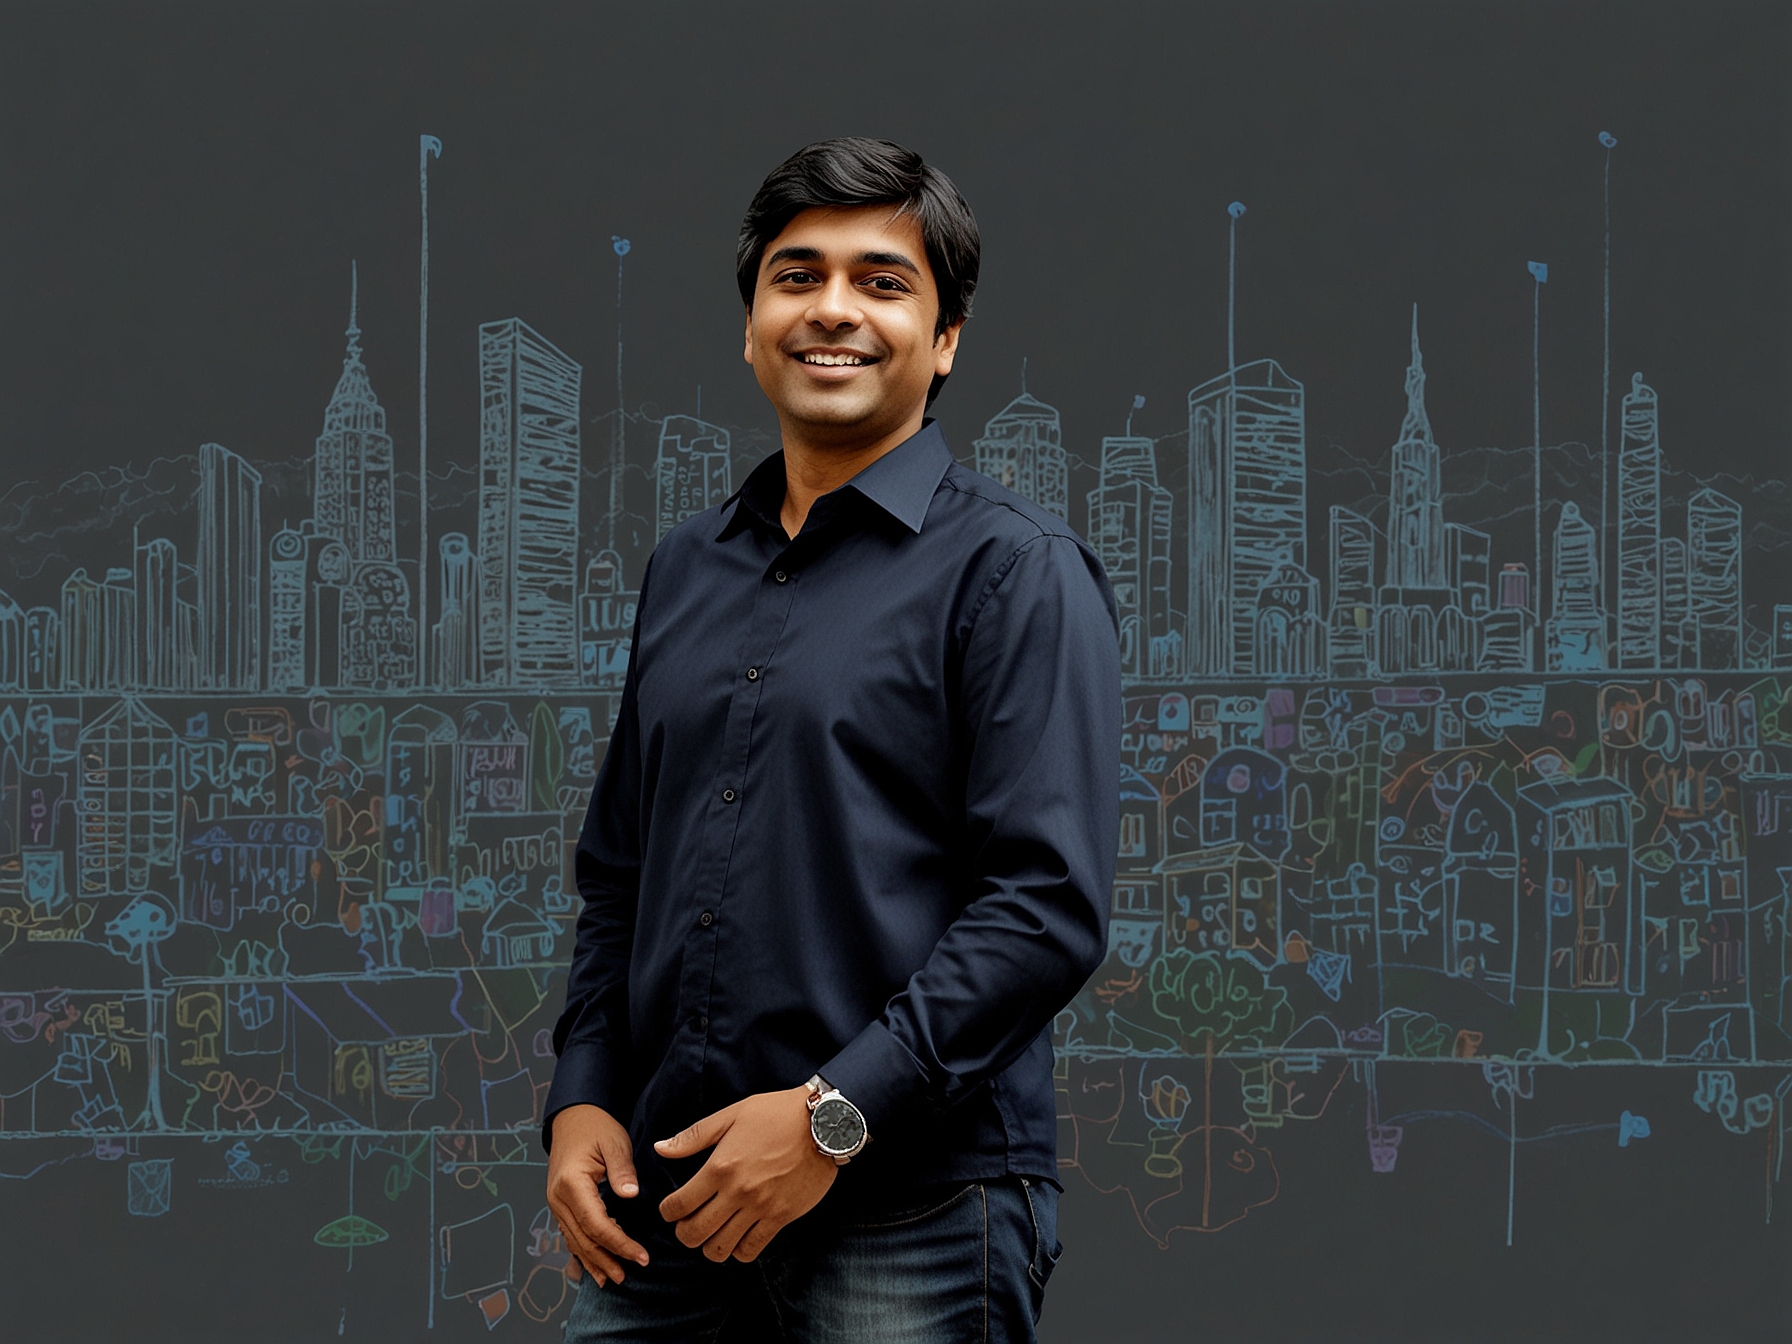 A graphic showing InMobi's founder Naveen Tewari, highlighting the company's journey from its founding in 2007 to its current position as a leading ad-tech firm aiming for a local IPO.